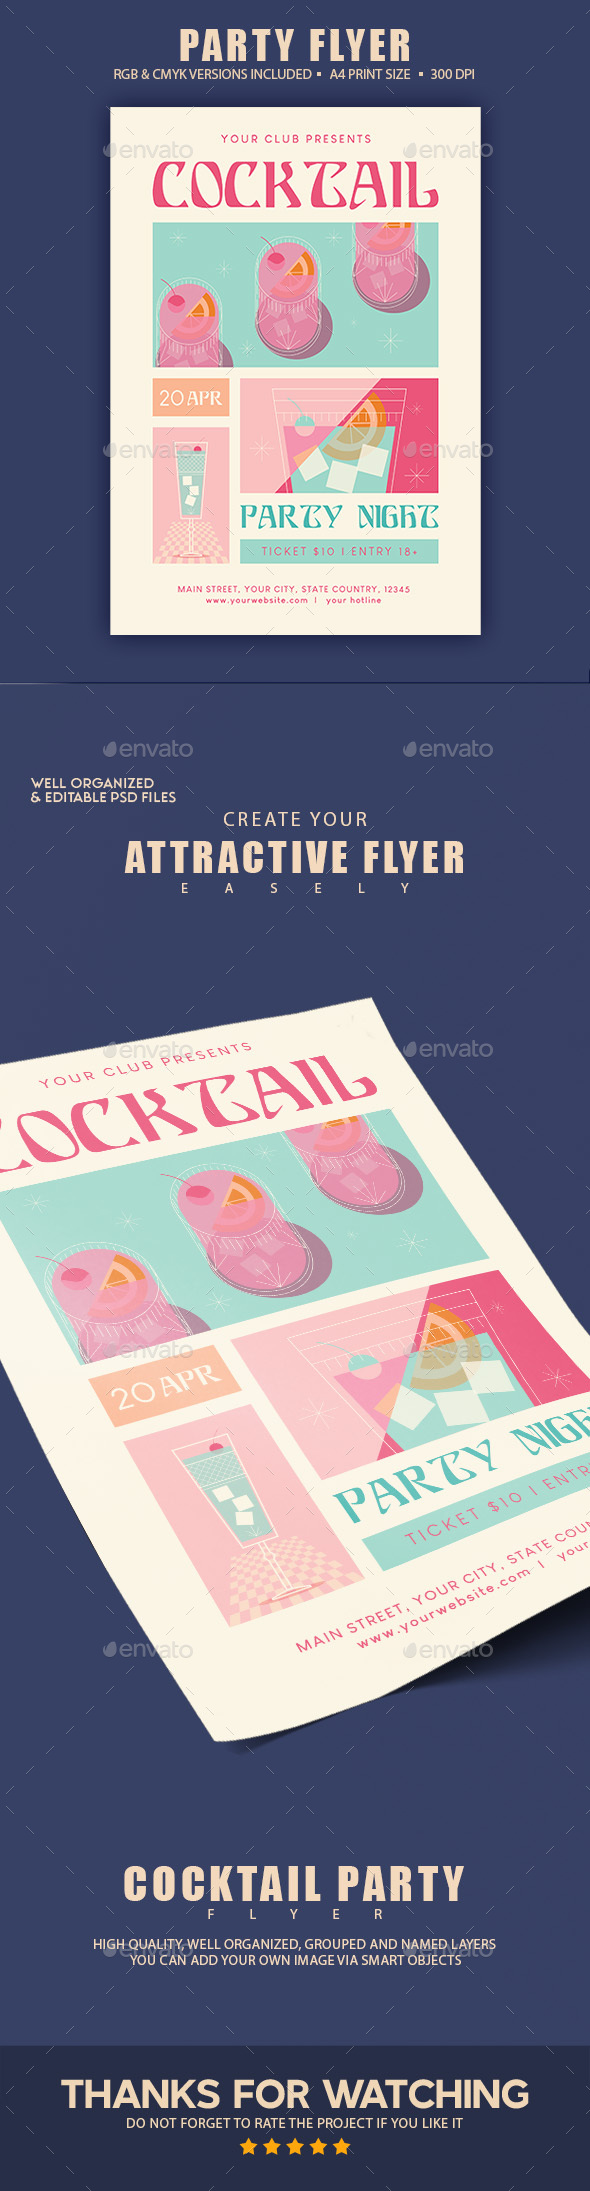 [DOWNLOAD]Cocktail Party Flyer